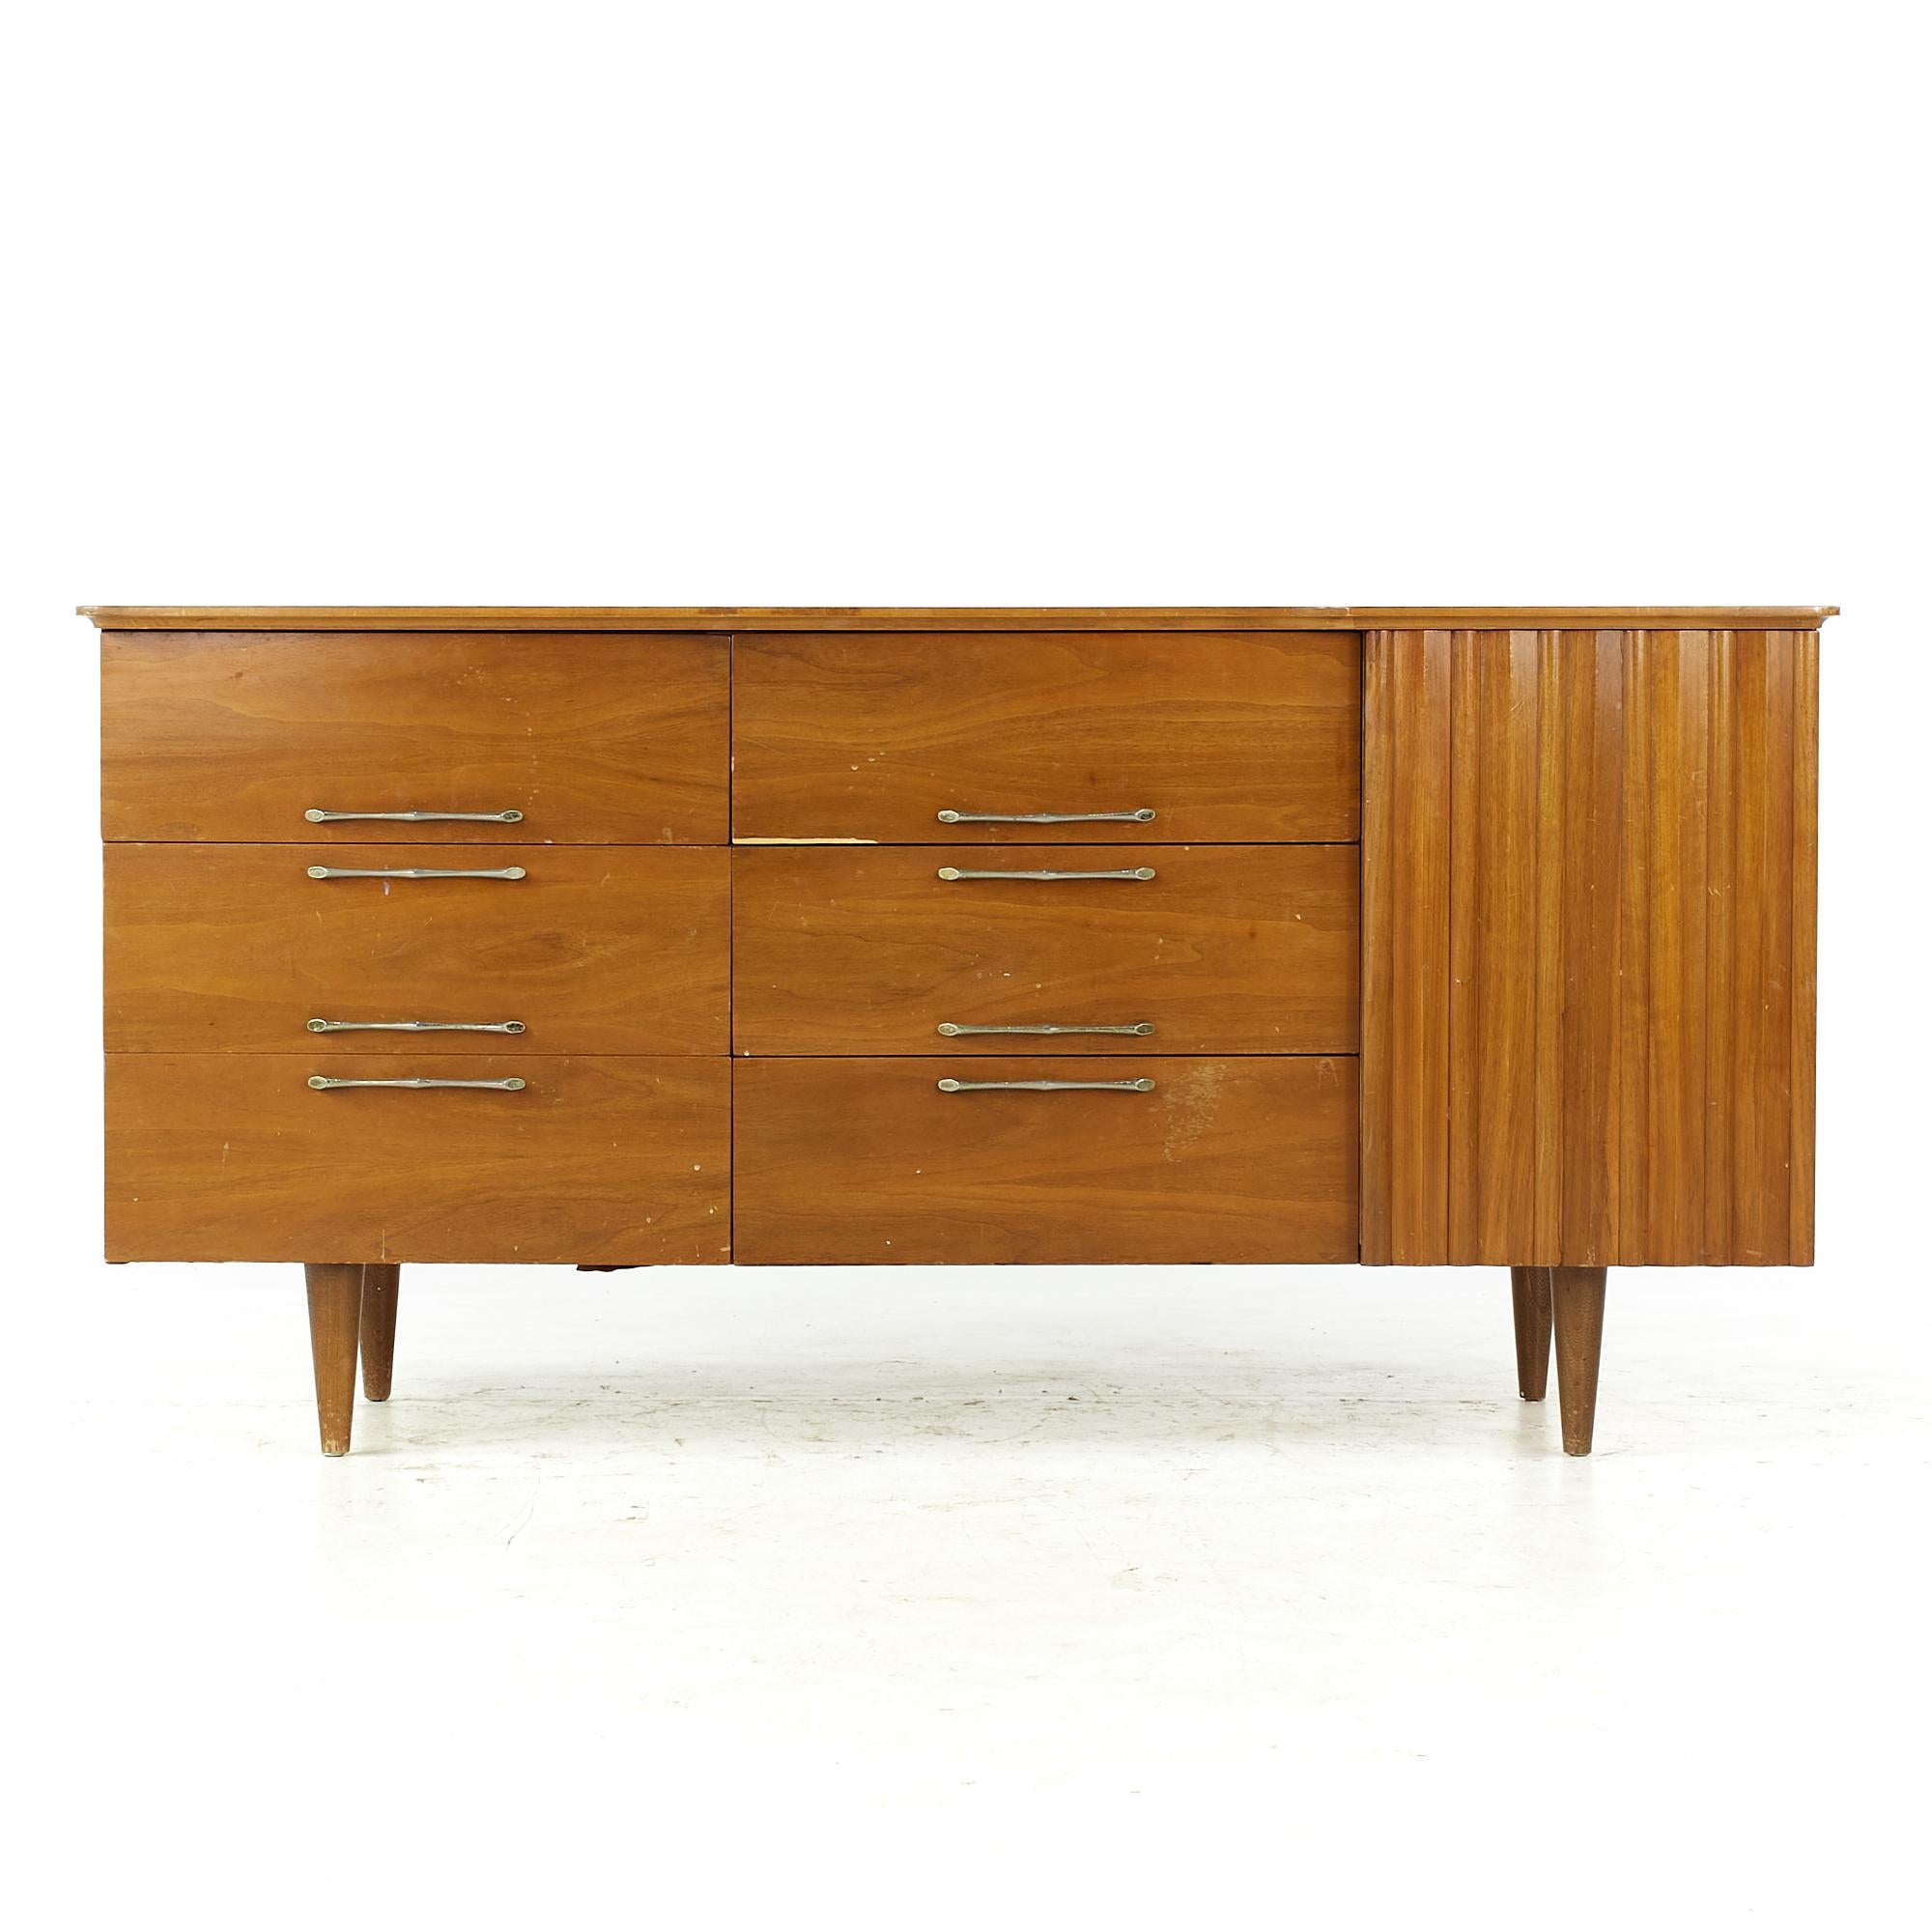 Young Manufacturing midcentury walnut lowboy dresser.

This lowboy measures: 62 wide x 20 deep x 30.5 inches high

All pieces of furniture can be had in what we call restored vintage condition. That means the piece is restored upon purchase so